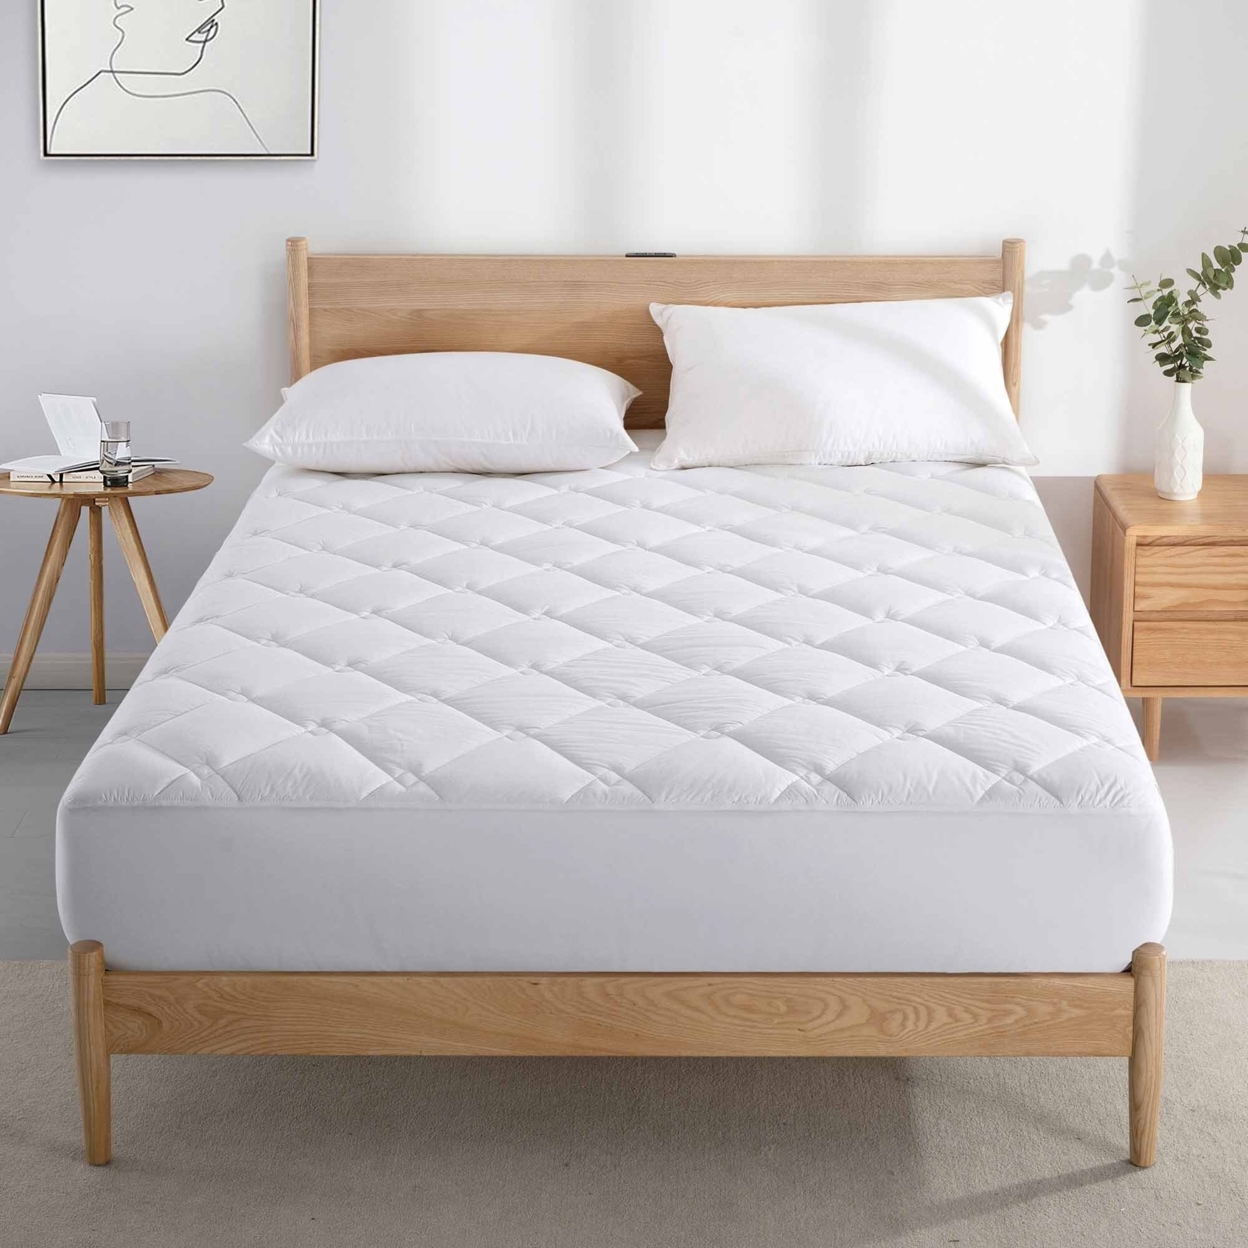 300 TC Cotton Cover Down Alternative Mattress Pad Topper, Quilted Design,Comforterable&Supportive , Deep Porket - Full, White